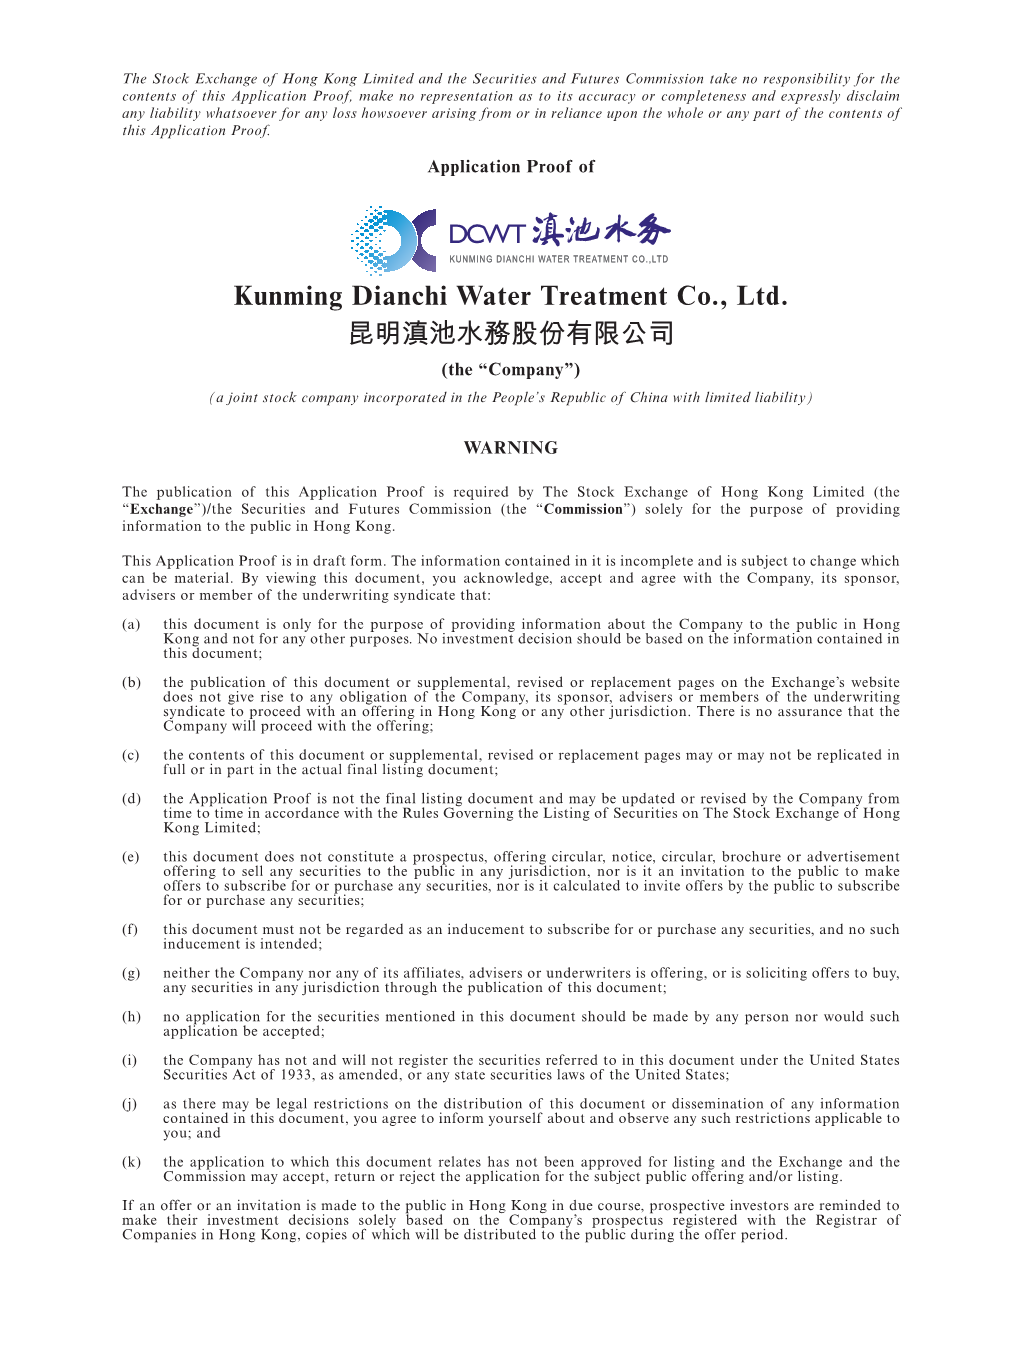 Kunming Dianchi Water Treatment Co., Ltd. 昆明滇池水務股份有限公司 (The “Company”) (A Joint Stock Company Incorporated in the People’S Republic of China with Limited Liability)